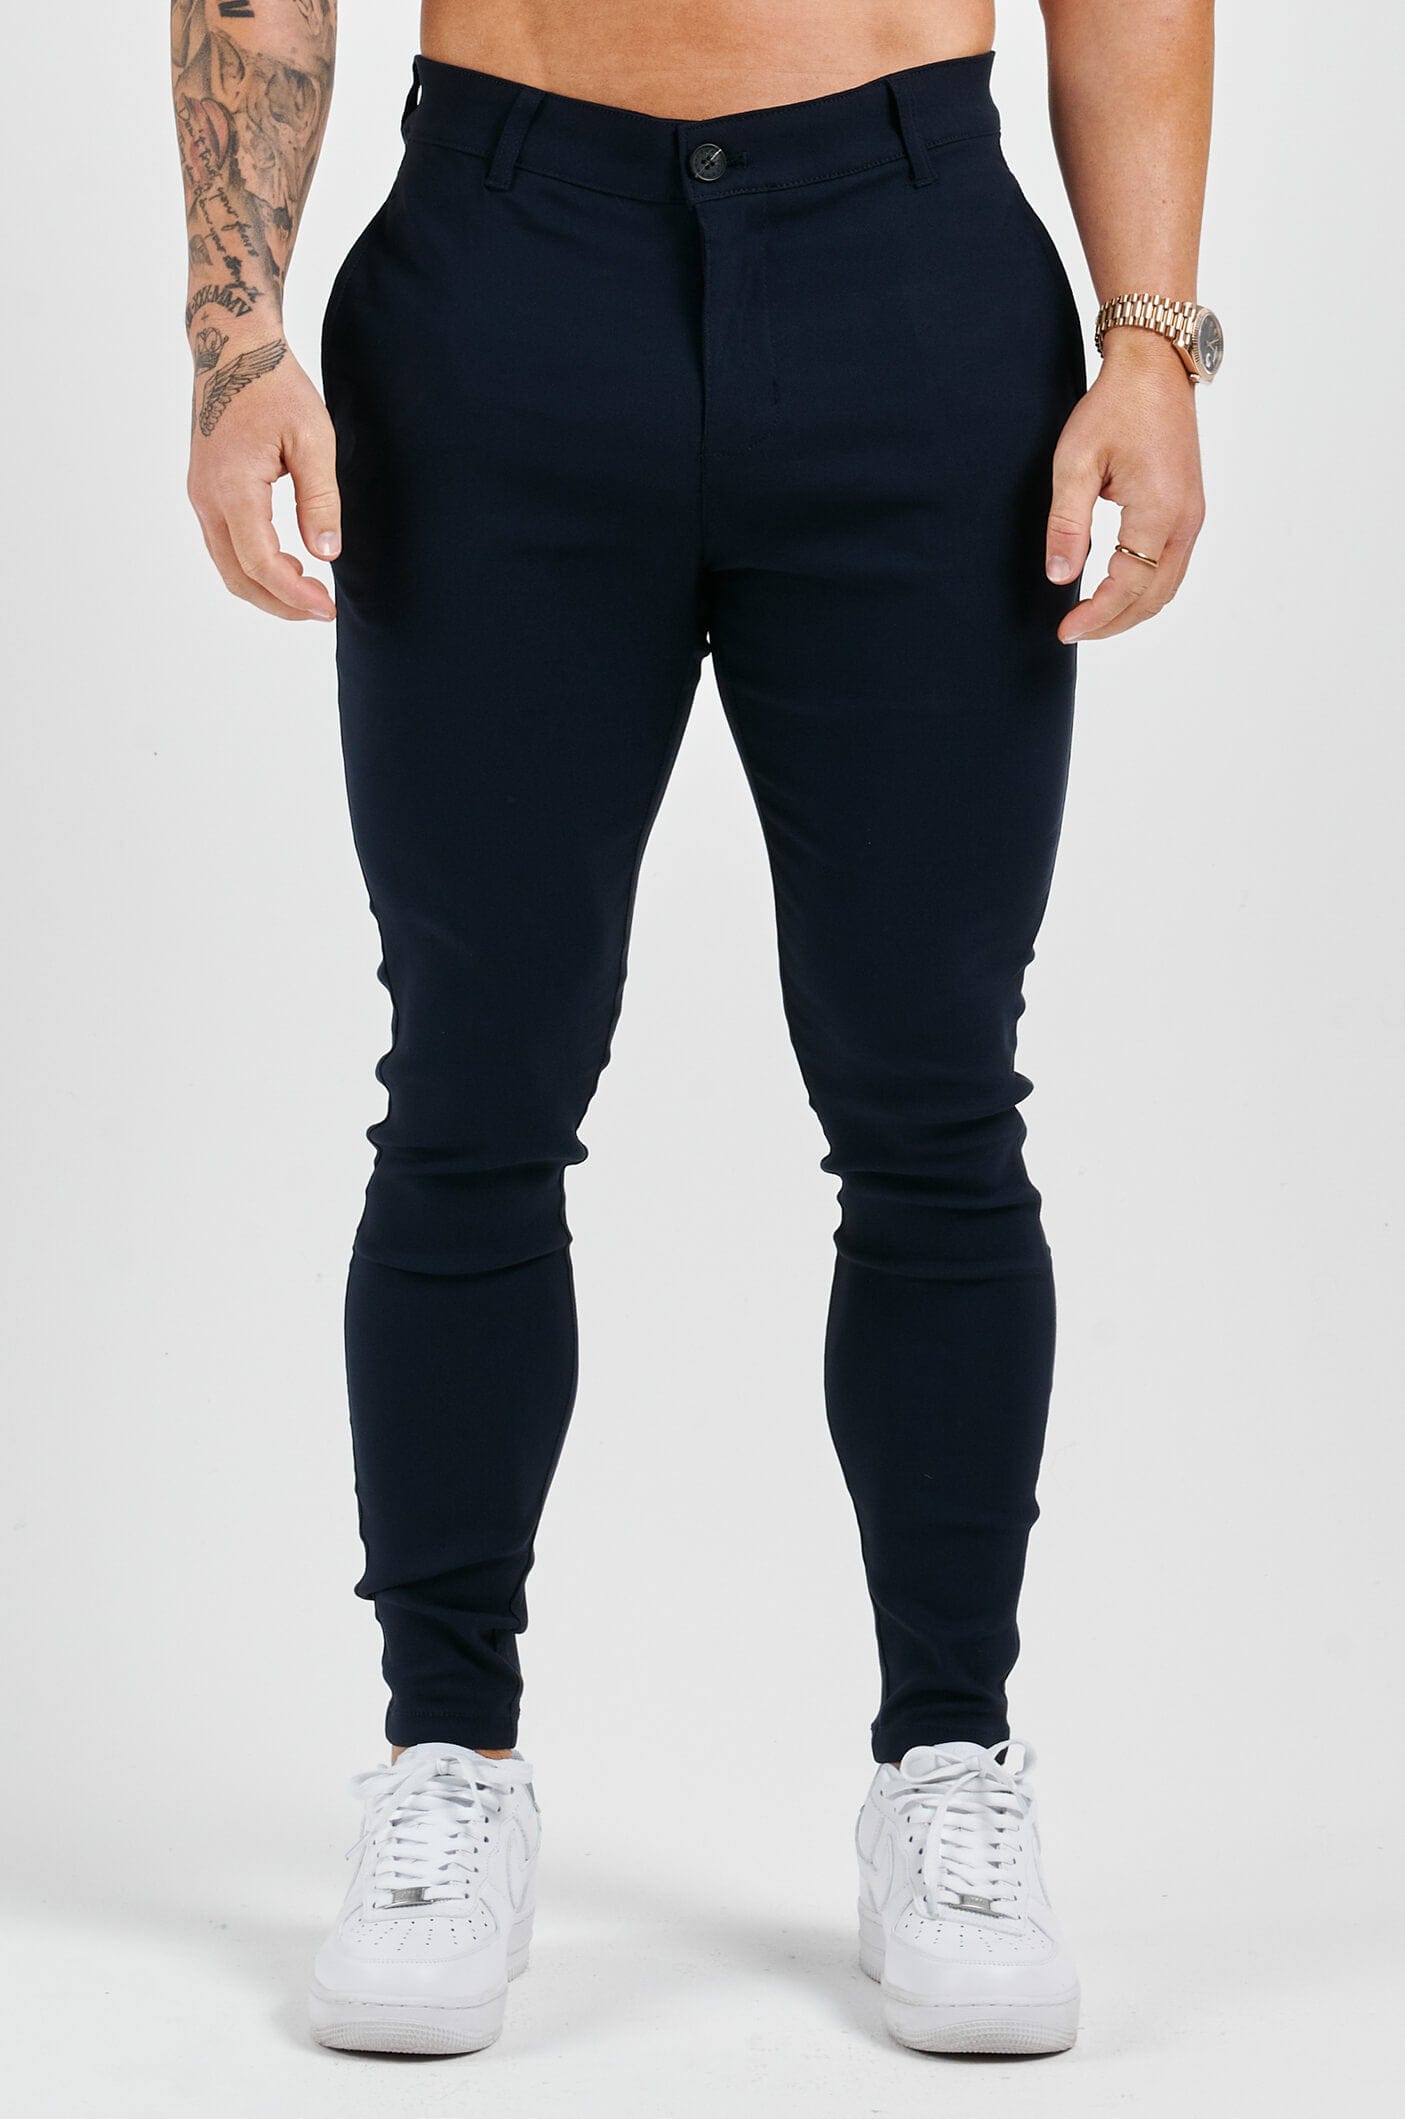 Legend London Trousers STRETCH COMFORT TROUSER - NAVY